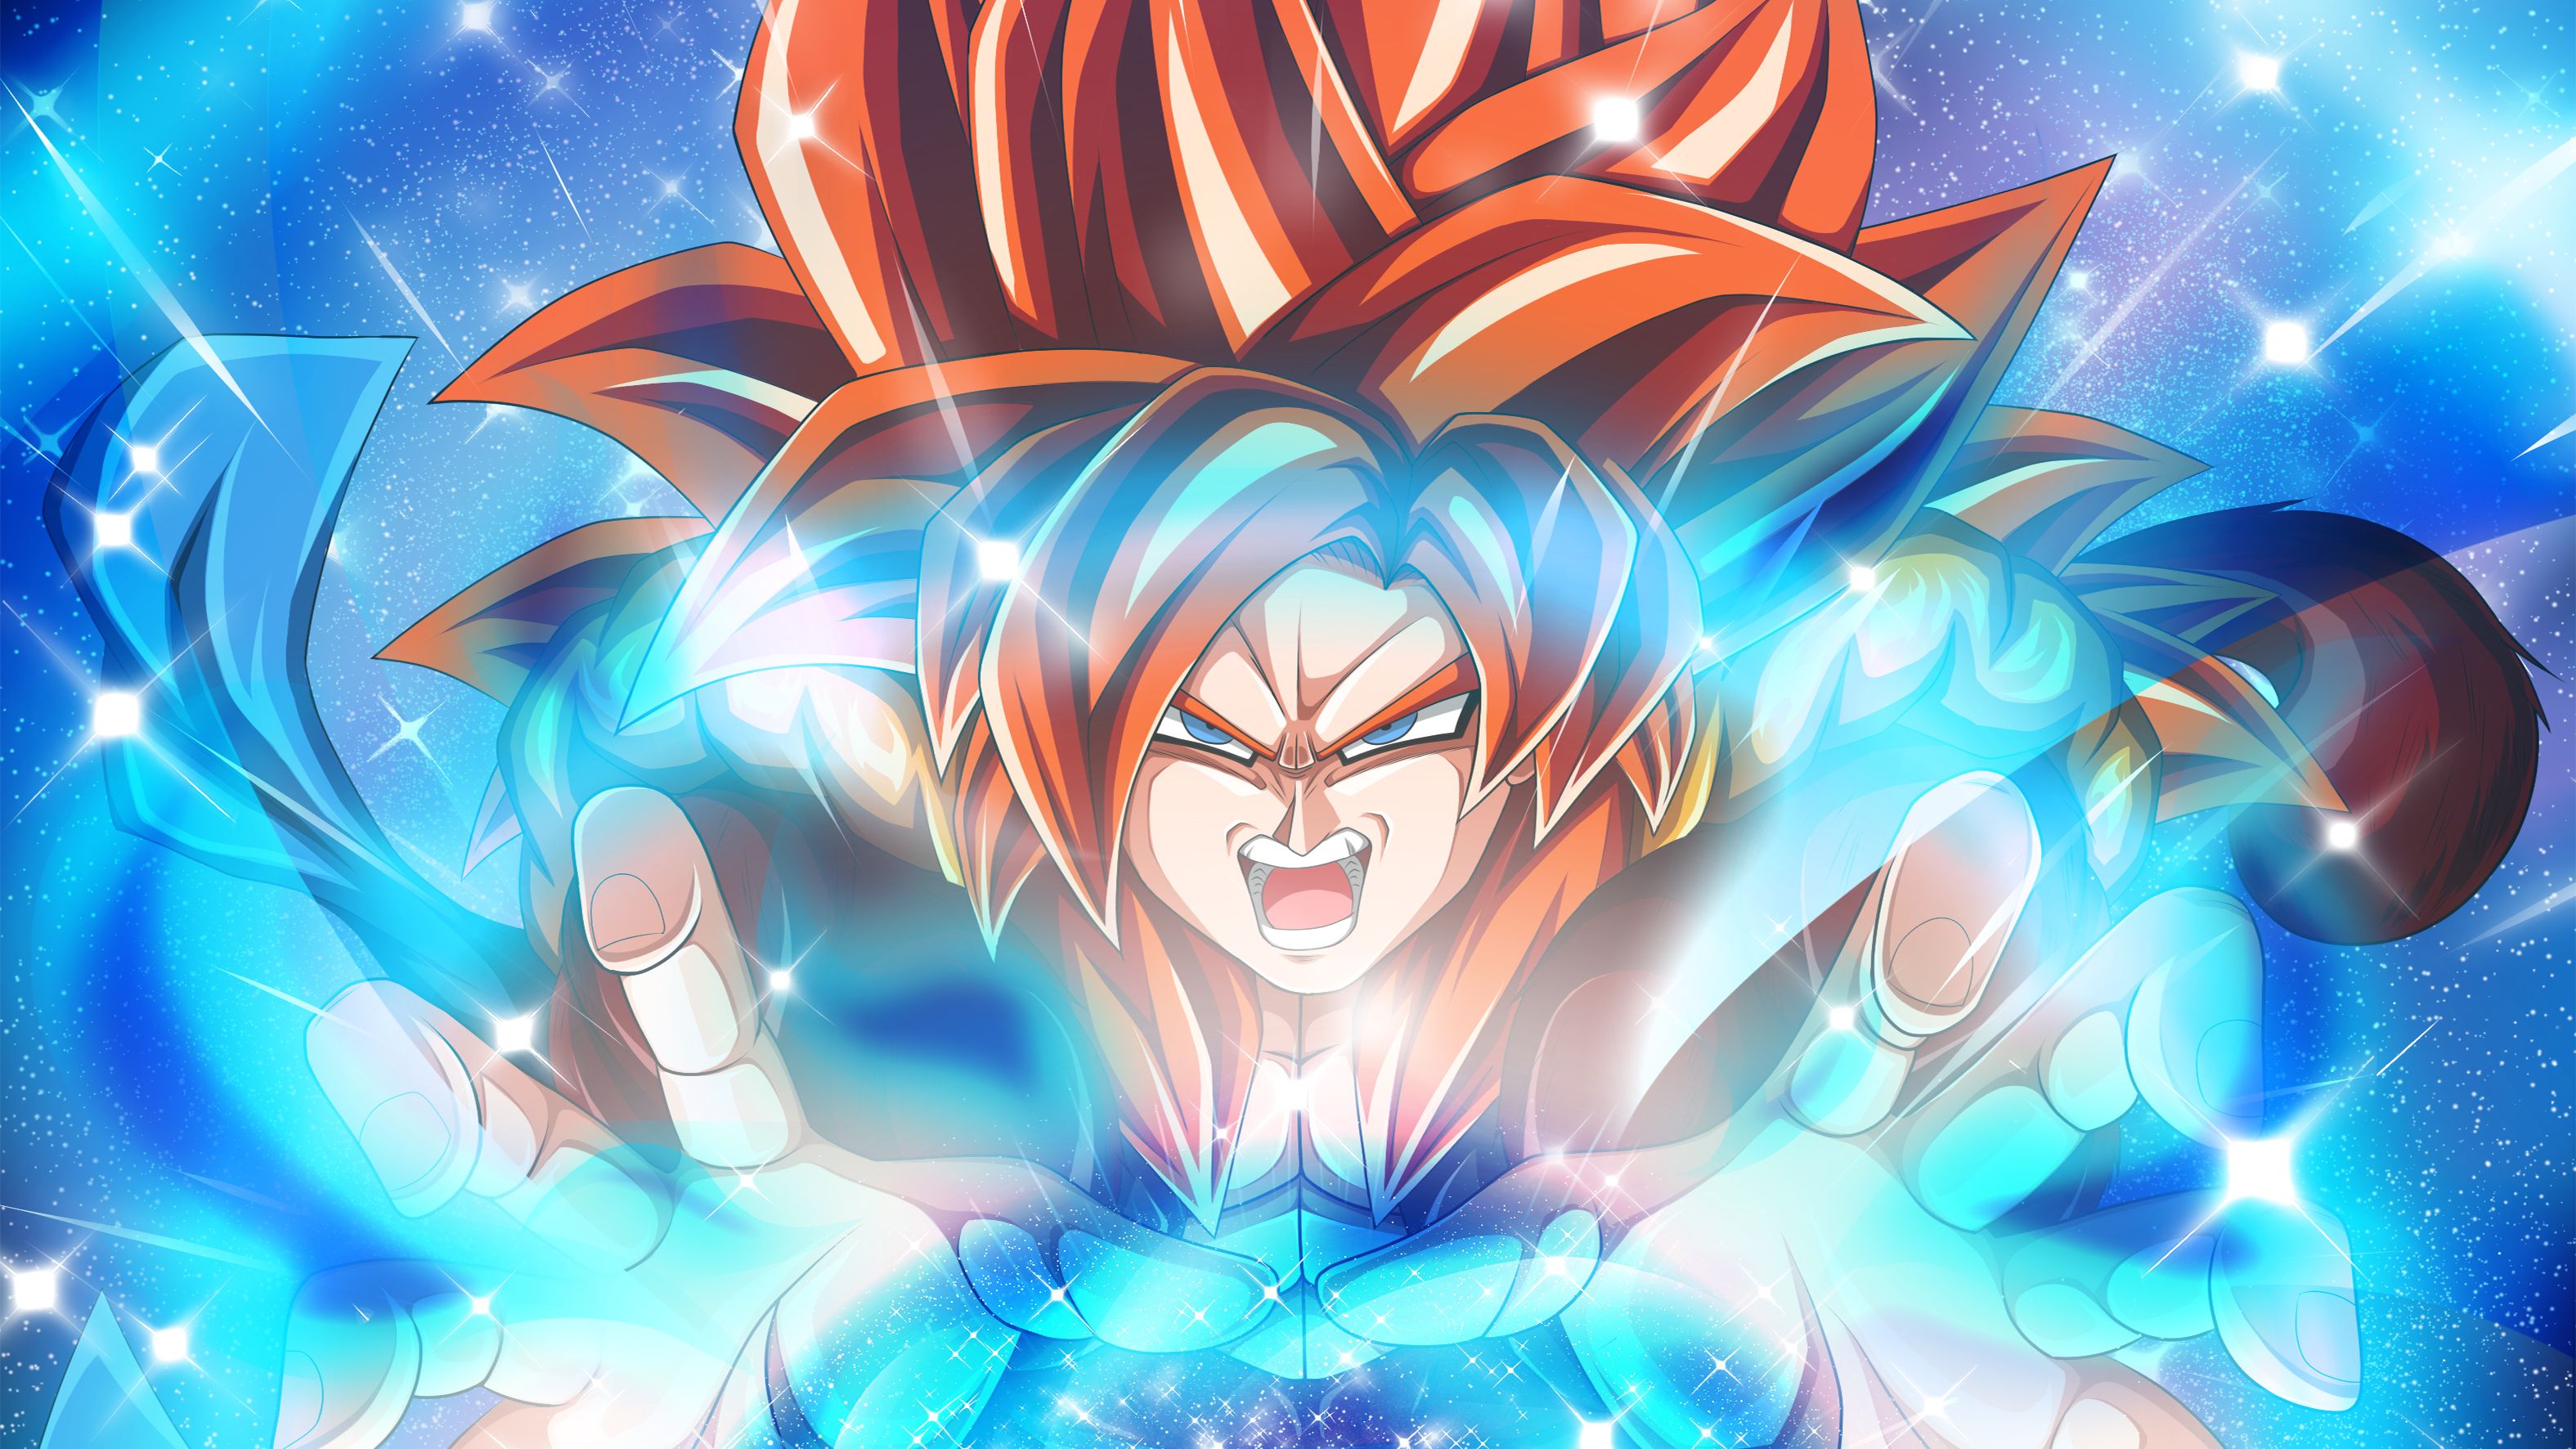 Dragon Ball Super Saiyan 4 Anime 4k, HD Games, 4k Wallpapers, Image, Backgrounds, Photos and Pictures